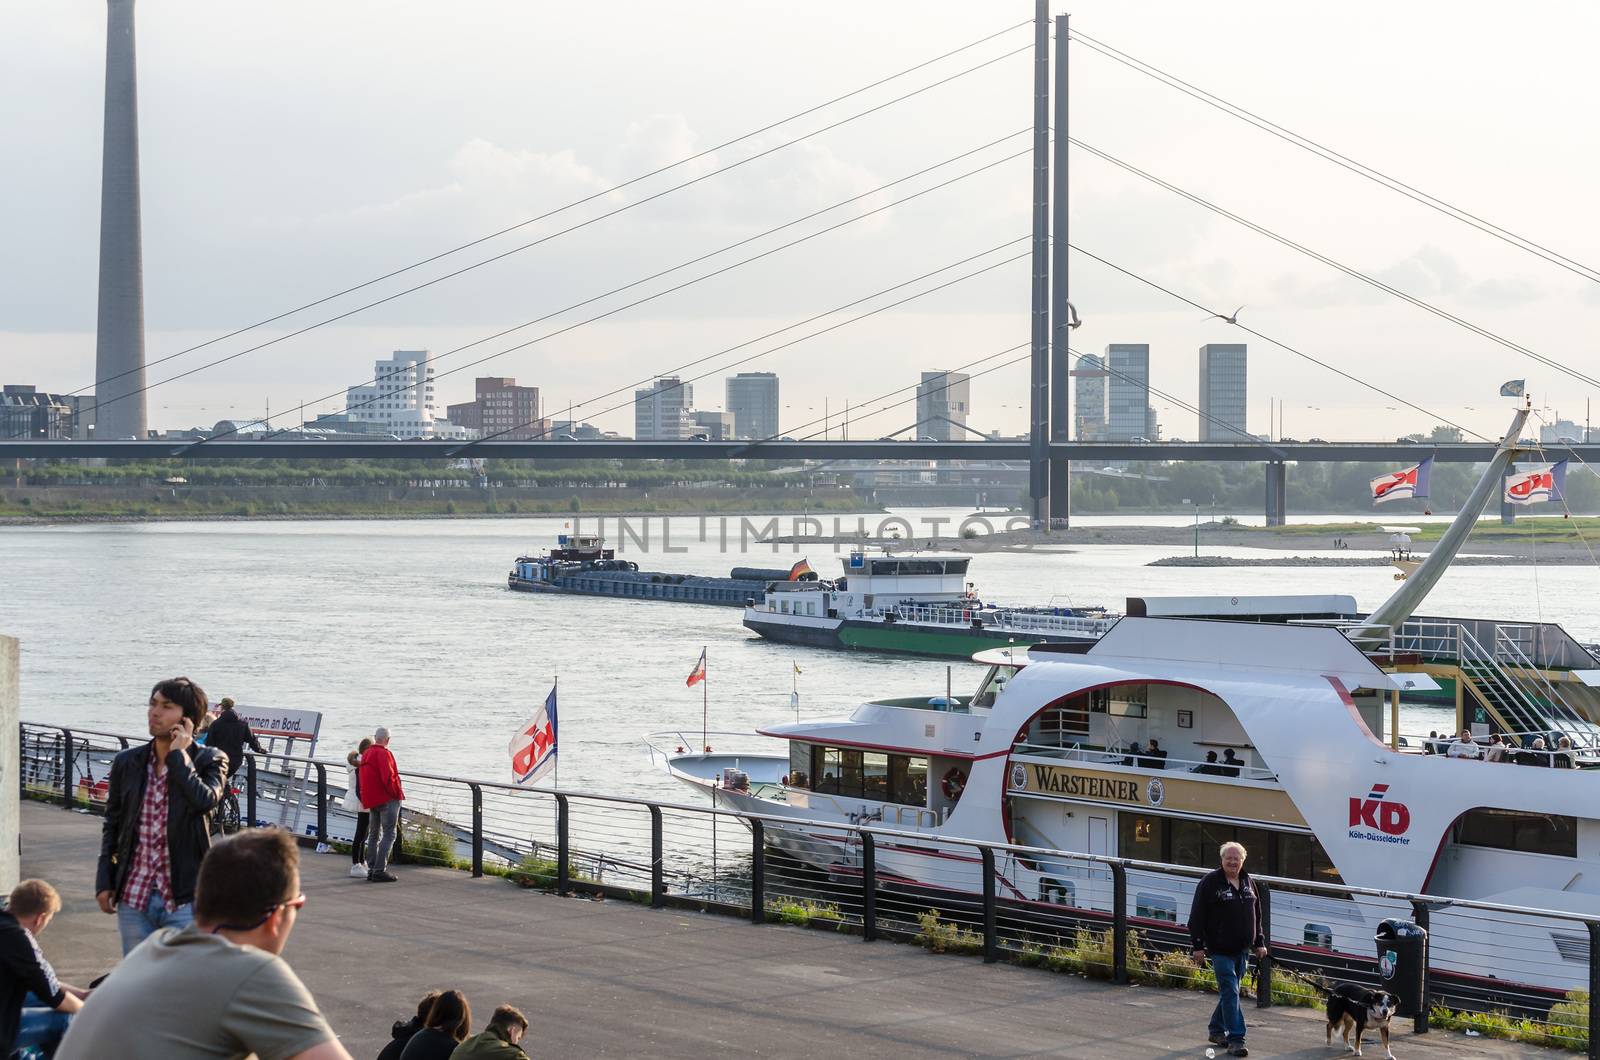 Dusseldorf Altstadt, Nrw, Germany - September 21, 2014: Rhine River Promenade in Dusseldorf Atlstadt.Die shore promenade in the old town of Düsseldorf designed by architects Niklaus Fritschi is one of the most beautiful.